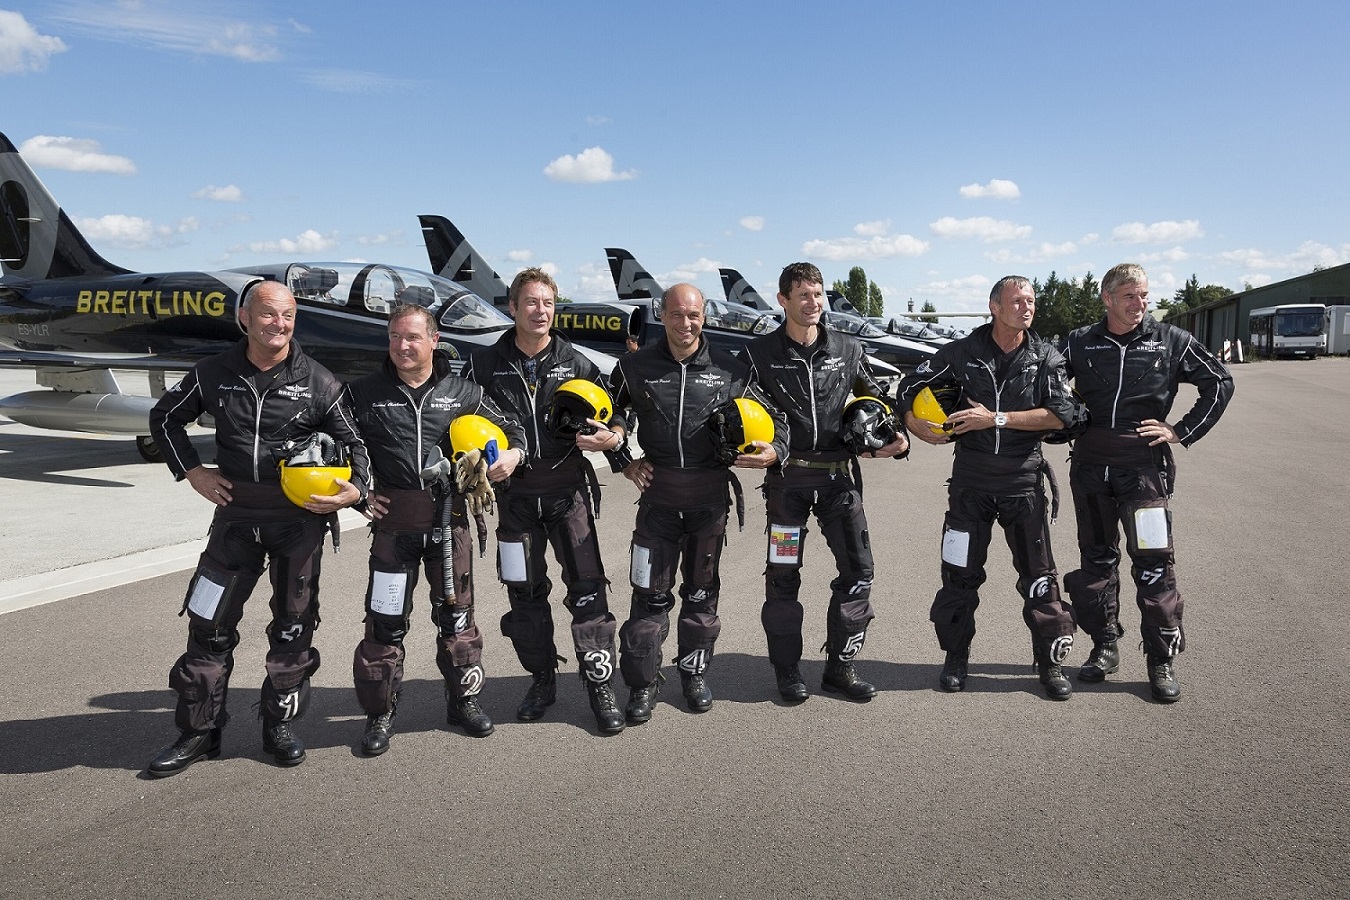 The Breitling Jet Team in front of their steeds during their Asian tour. (photo via Breitling Jet Team)